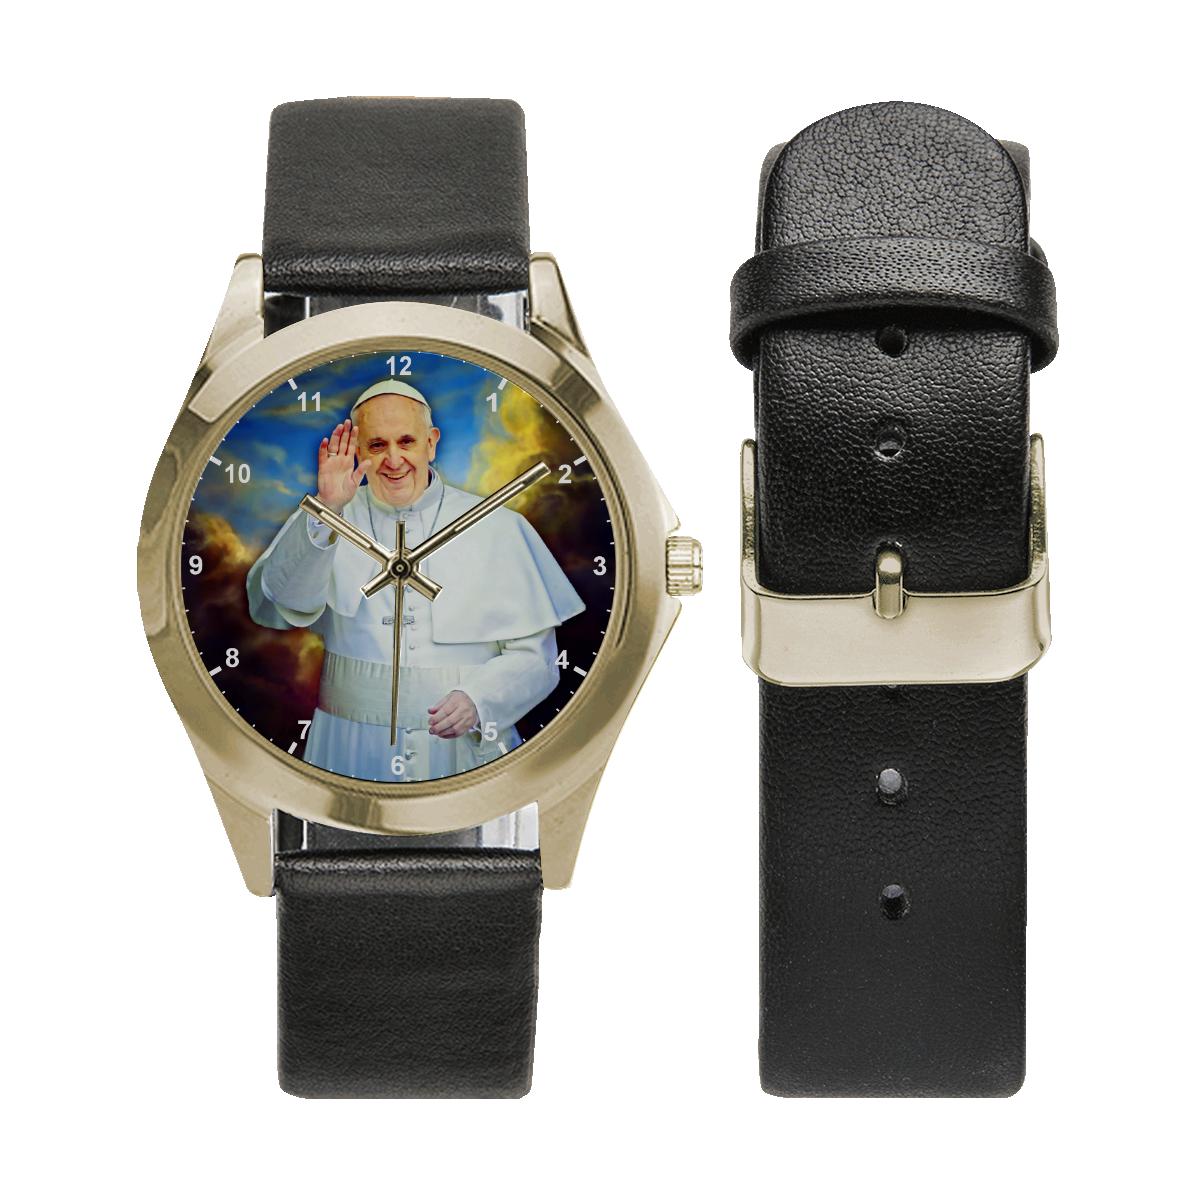 Pope Francis Unisex Silver-Tone Round Leather Watch (Model 216)